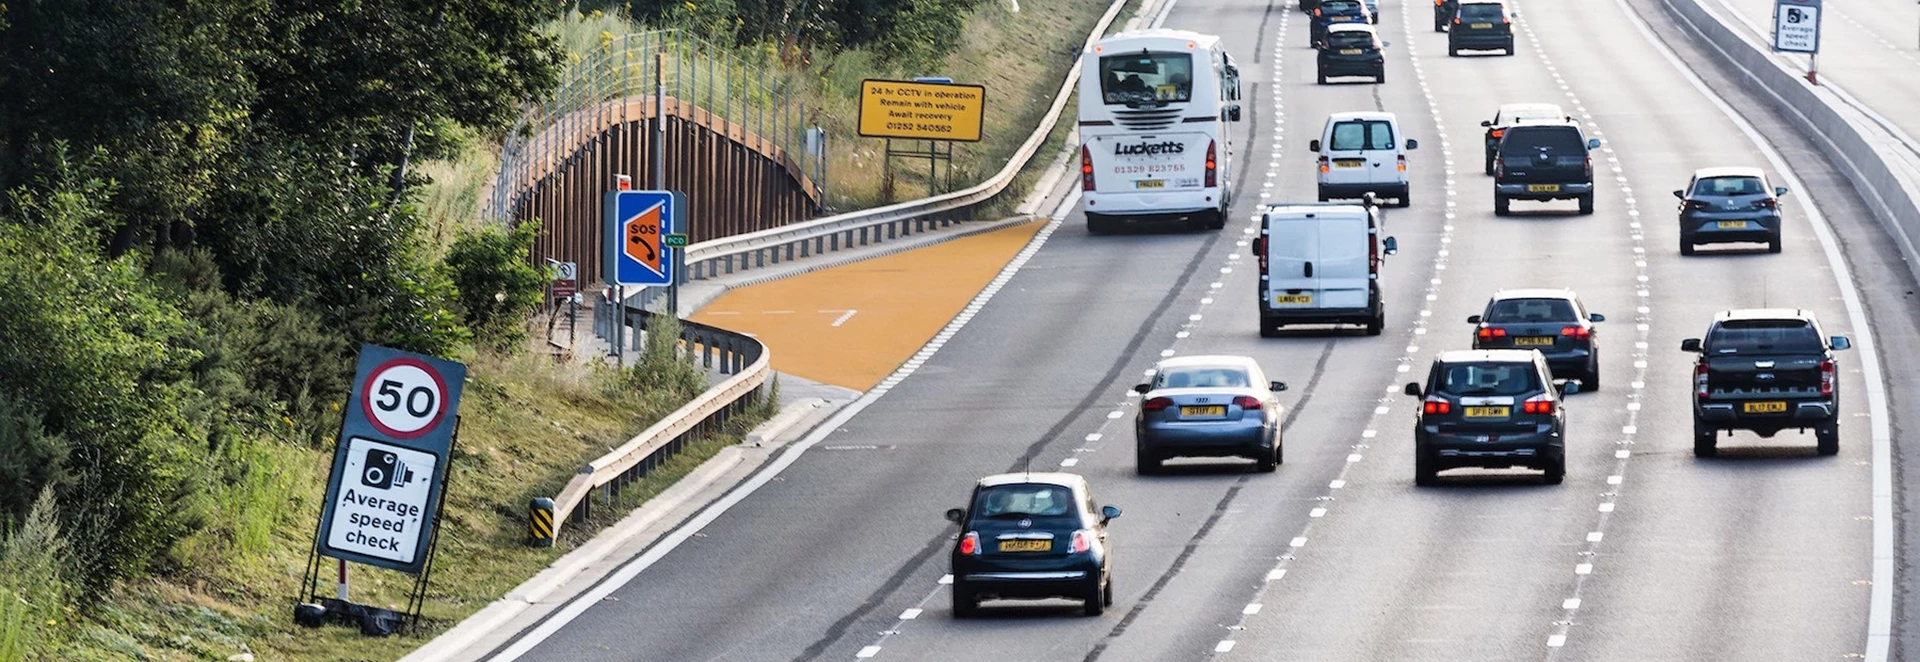 Smart motorway rollout should be halted, say MPs